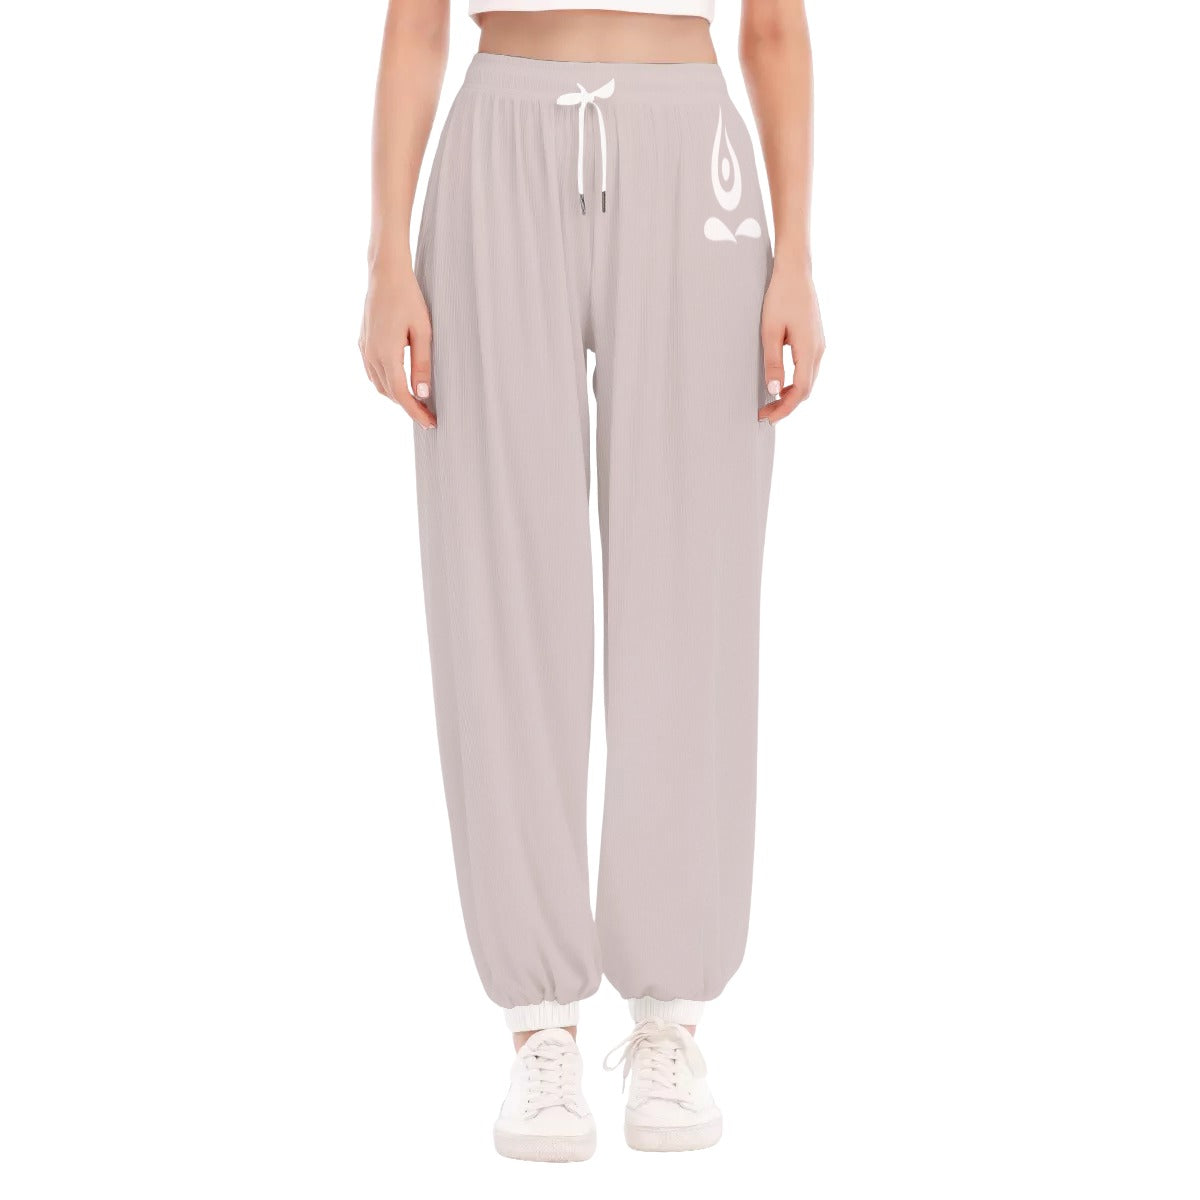 Loose Yoga Wear - Women's Loose Striped Yoga Trousers - Personal Hour for Yoga and Meditations 